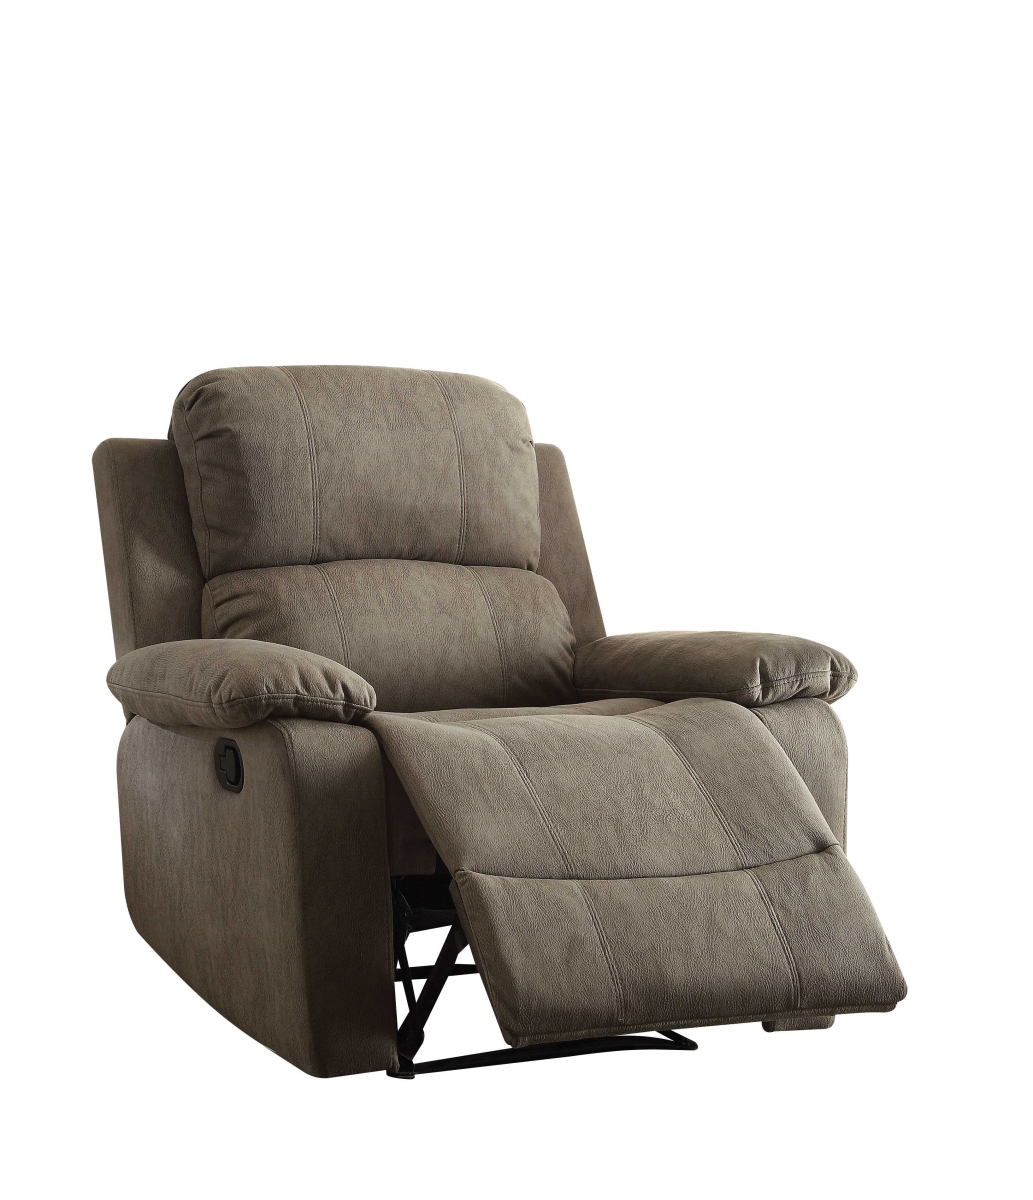 Home Roots Furniture 286180 39 X 38 X 38 In. Polished Microfiber Fabric Recliner - Gray